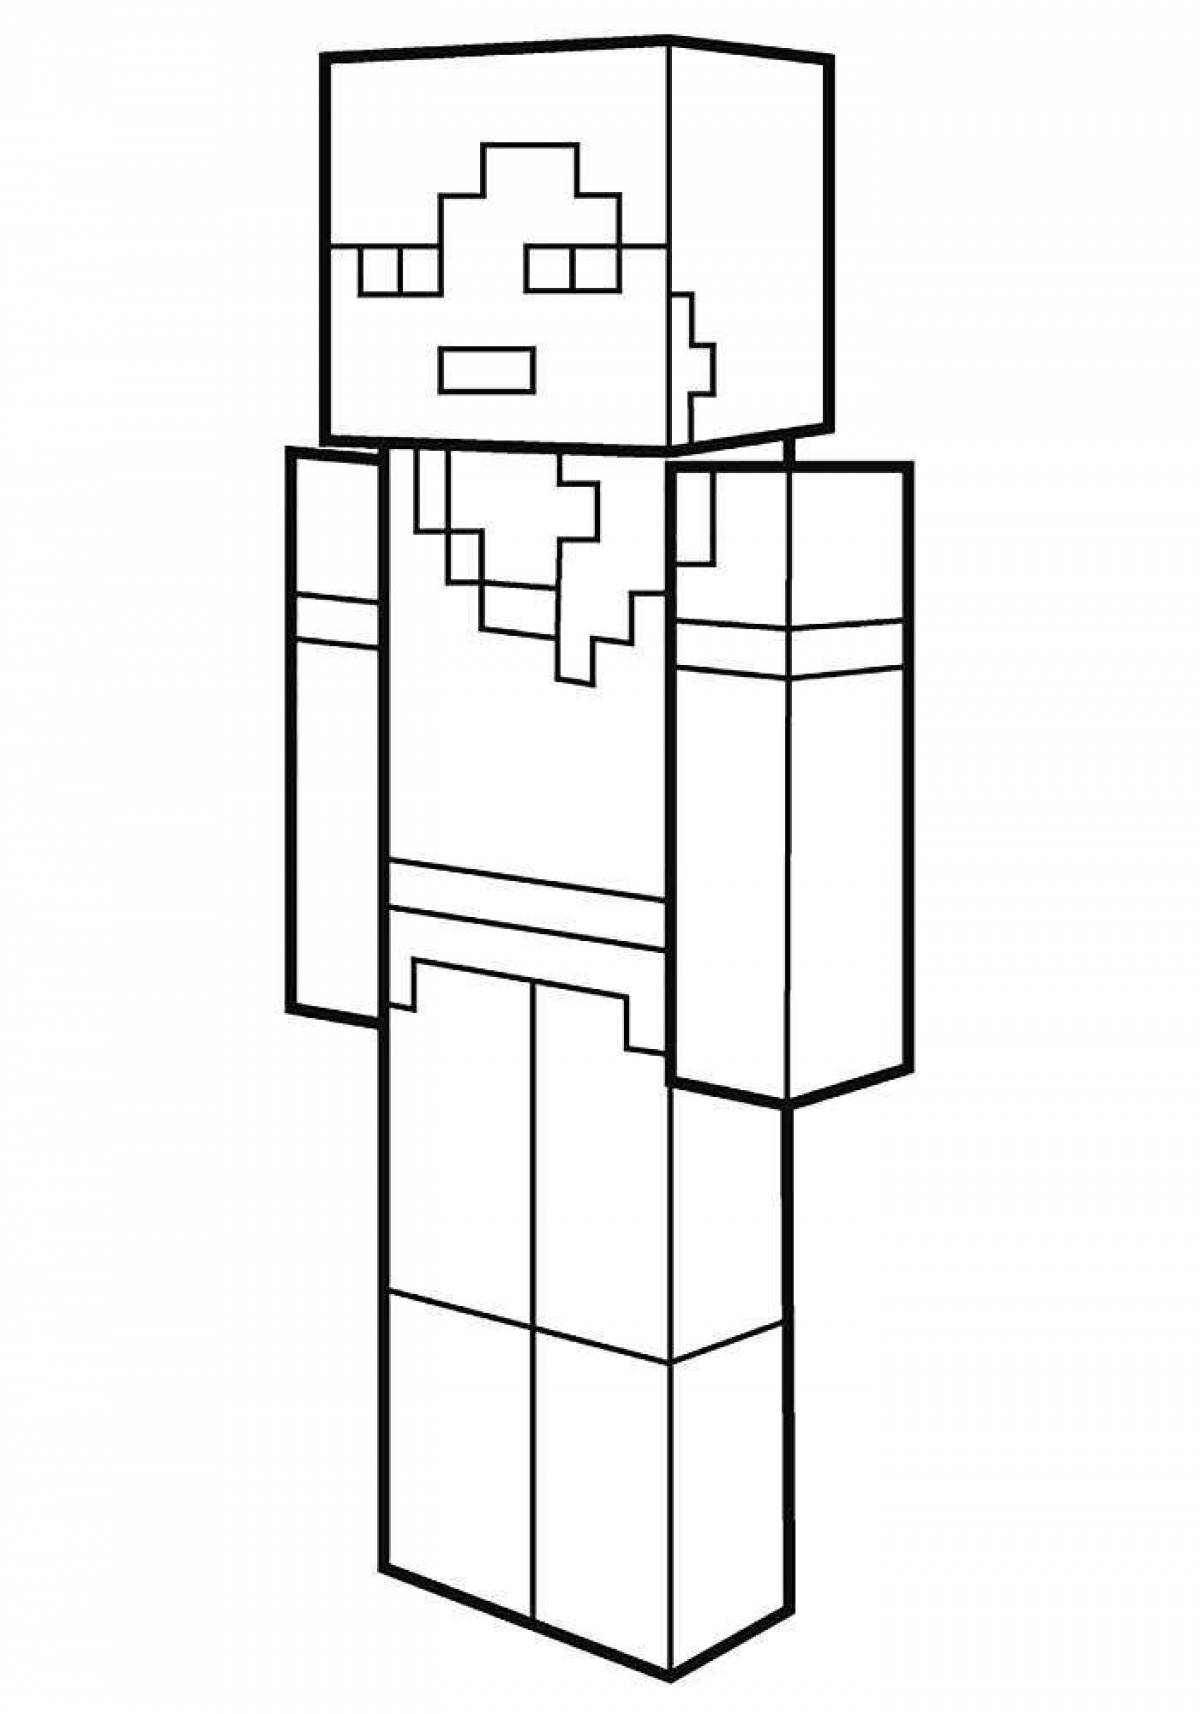 Detailed minecraft villager coloring page